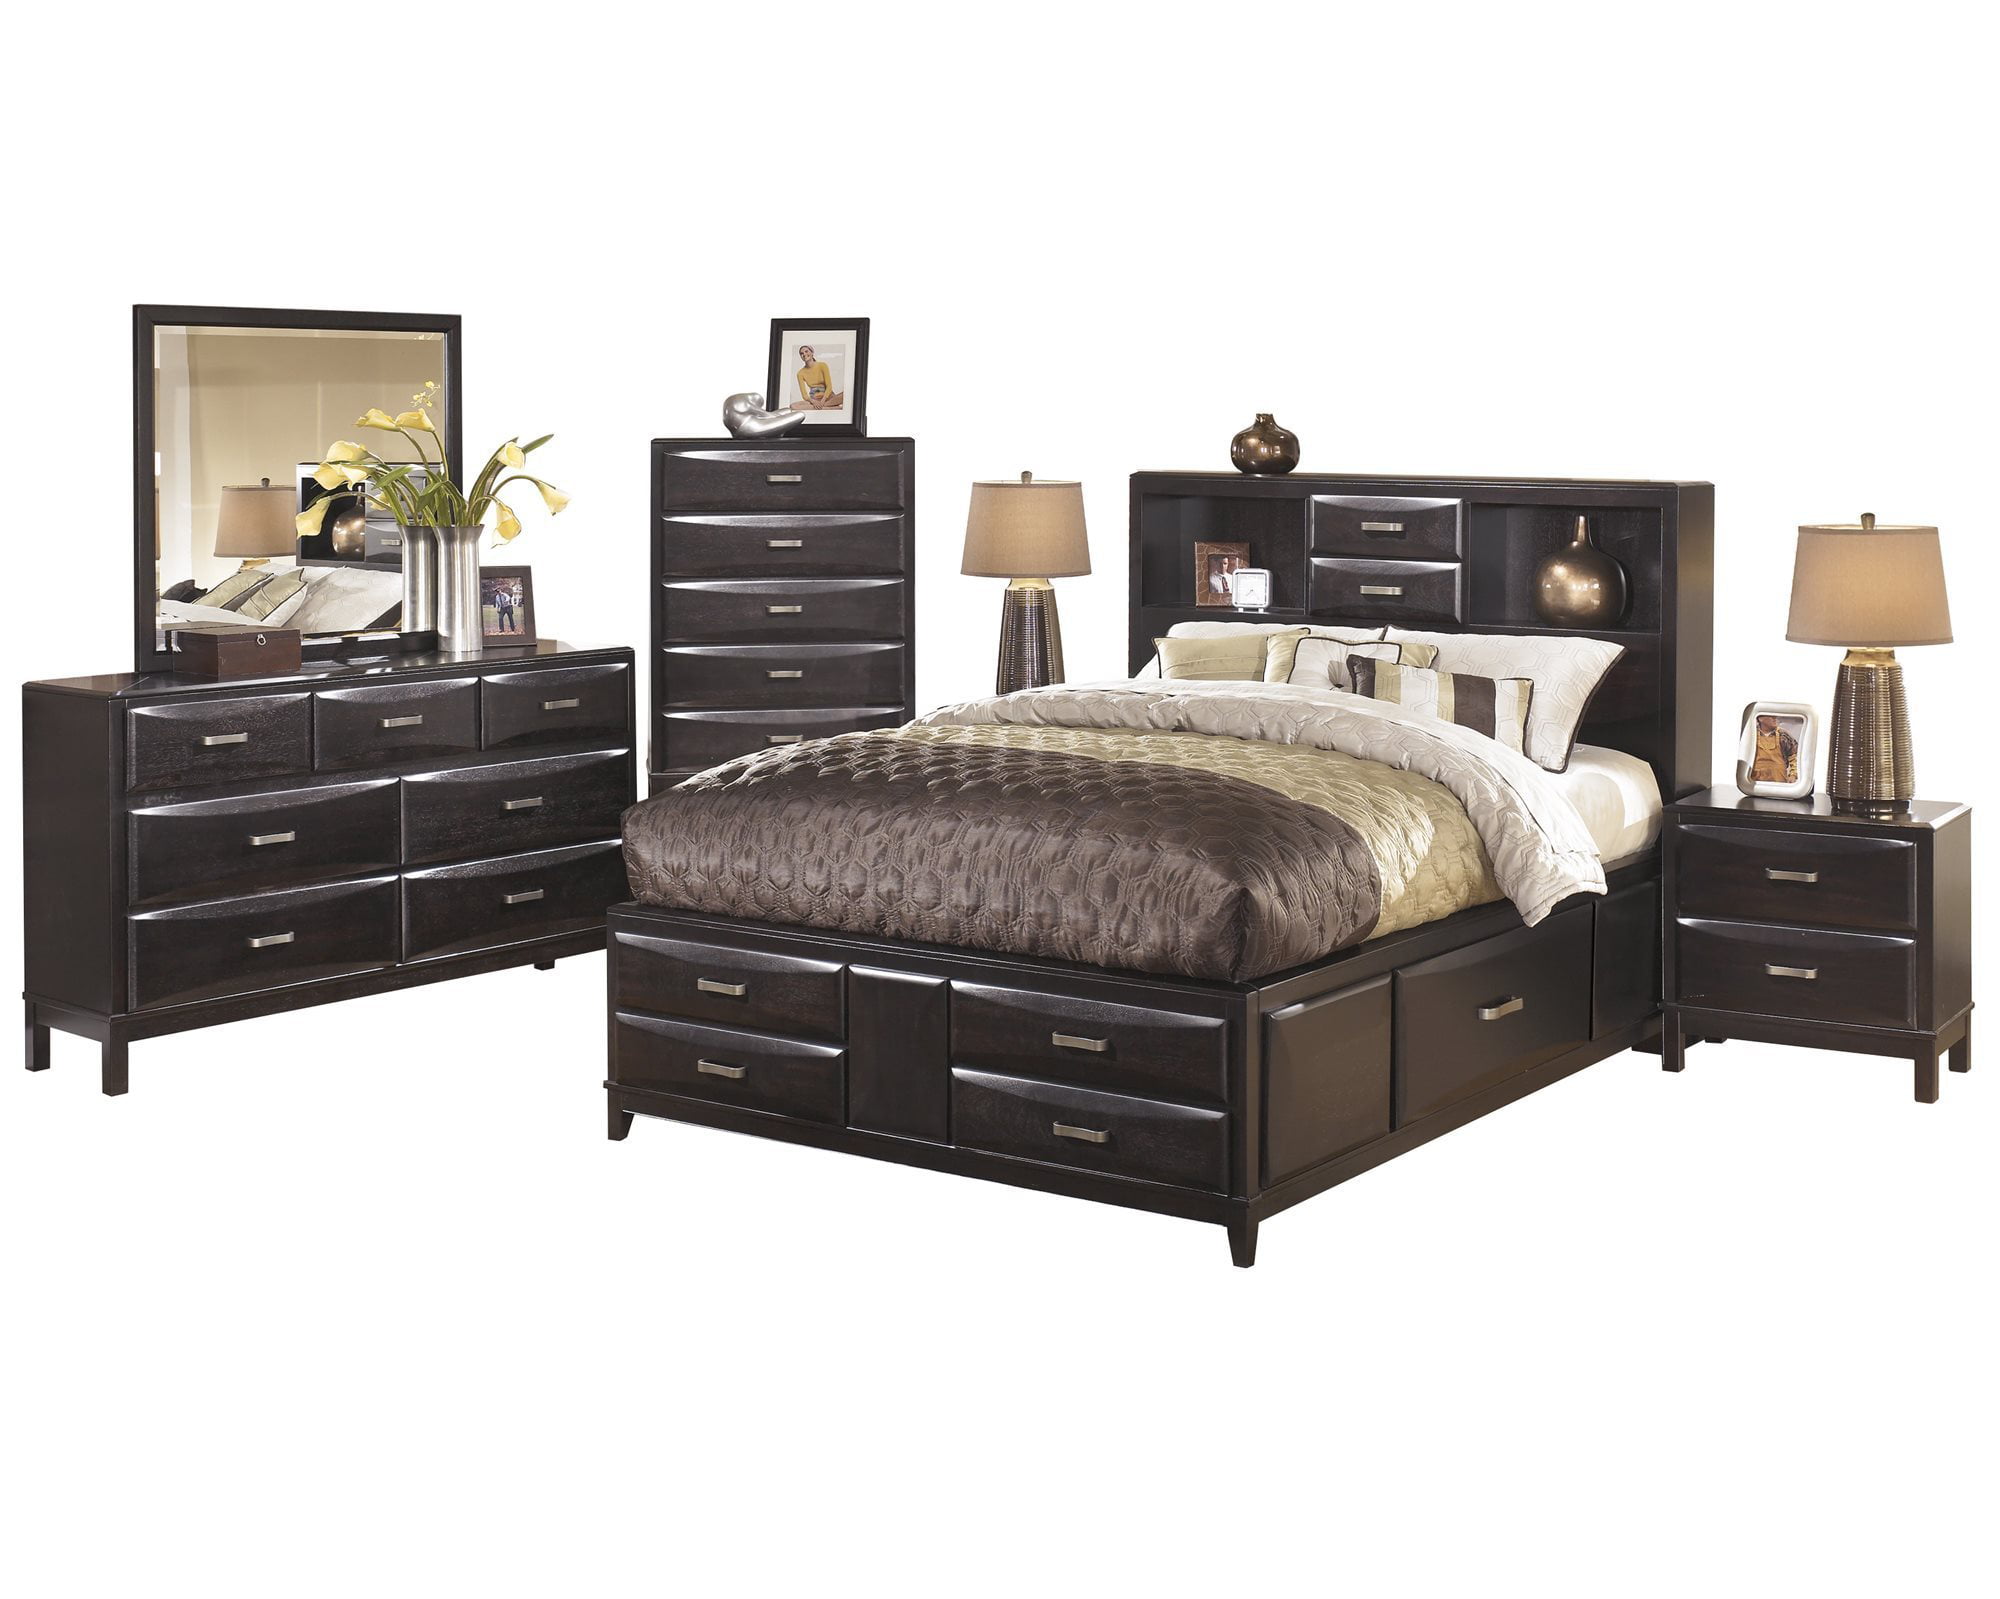 Featured image of post Black Ashley Furniture Bedroom Sets / Bedroom furniture by ashley homestore create the restful retreat you deserve with ashley bedroom furniture and decor.